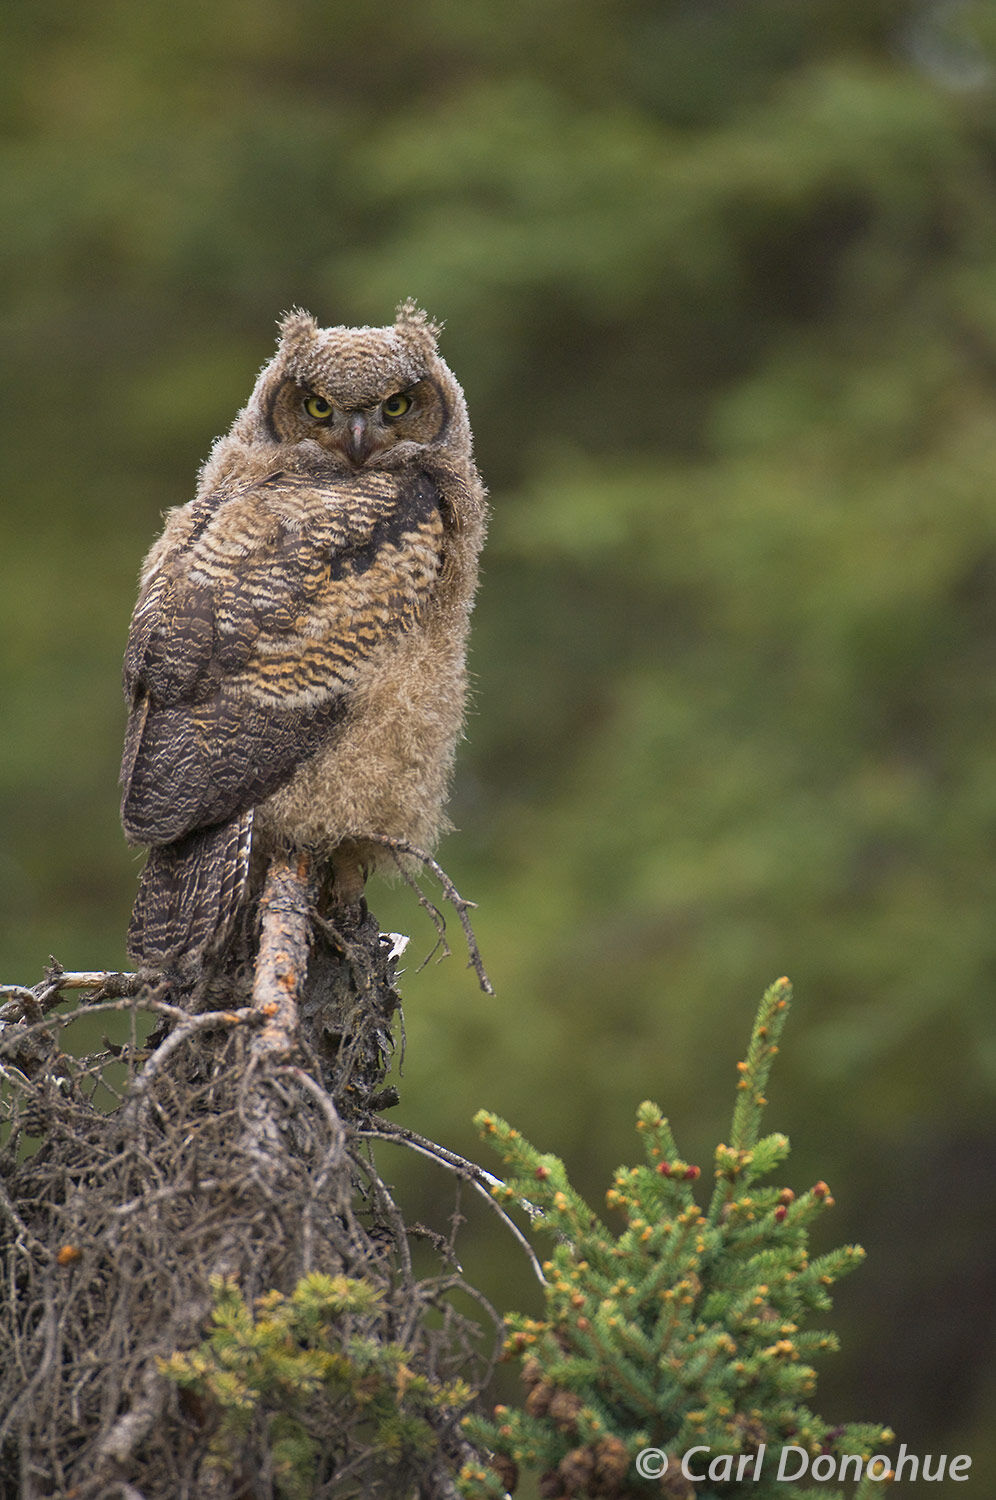 The tufts of feathers on the Great Horned Owl's head give it a regal appearance as it watches over its territory in Alaska. This...